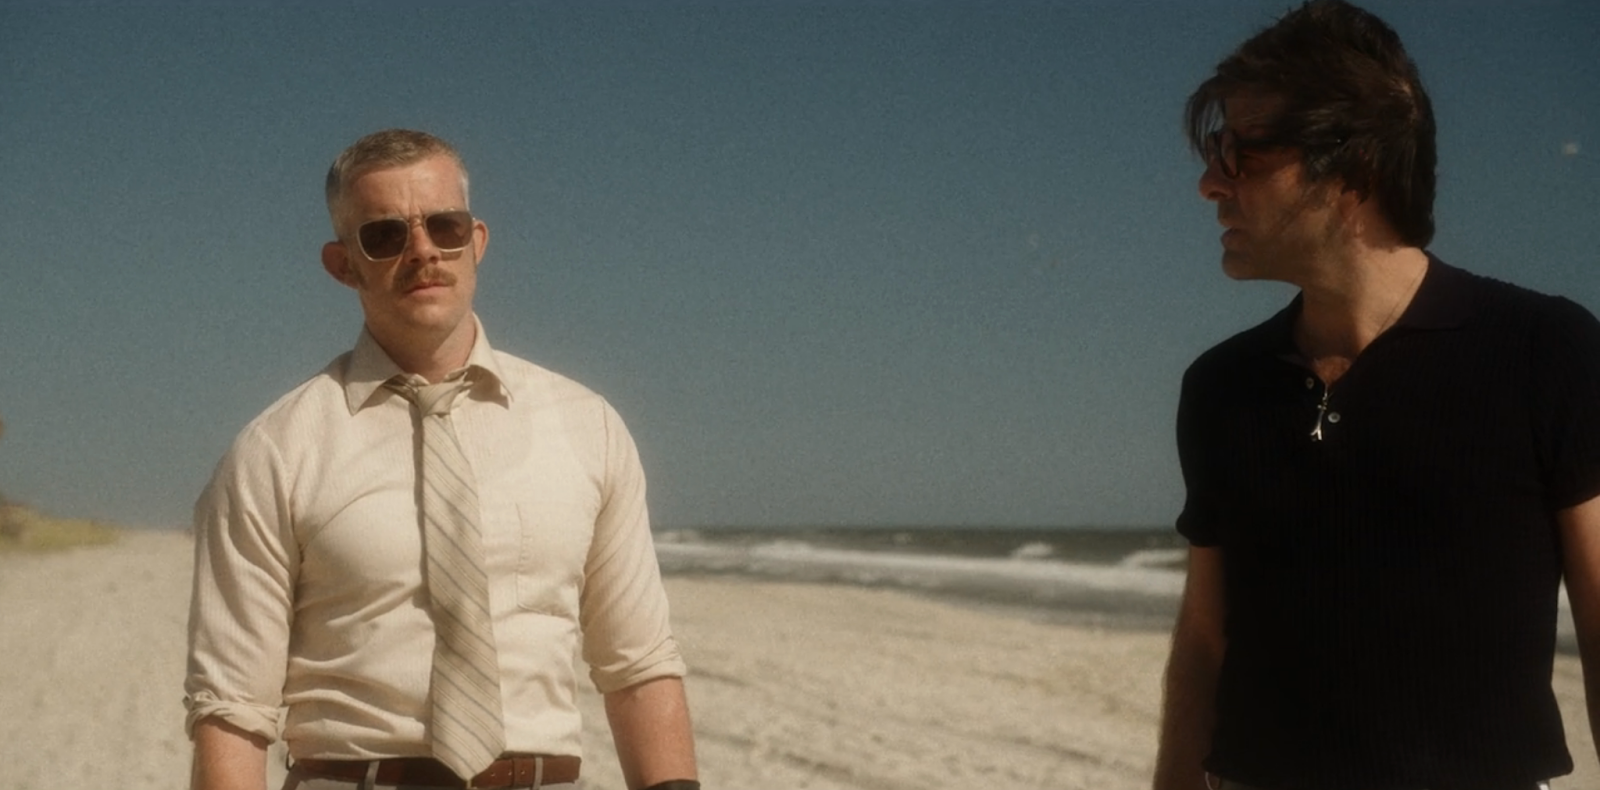 Two white men on the beach during the daytime.